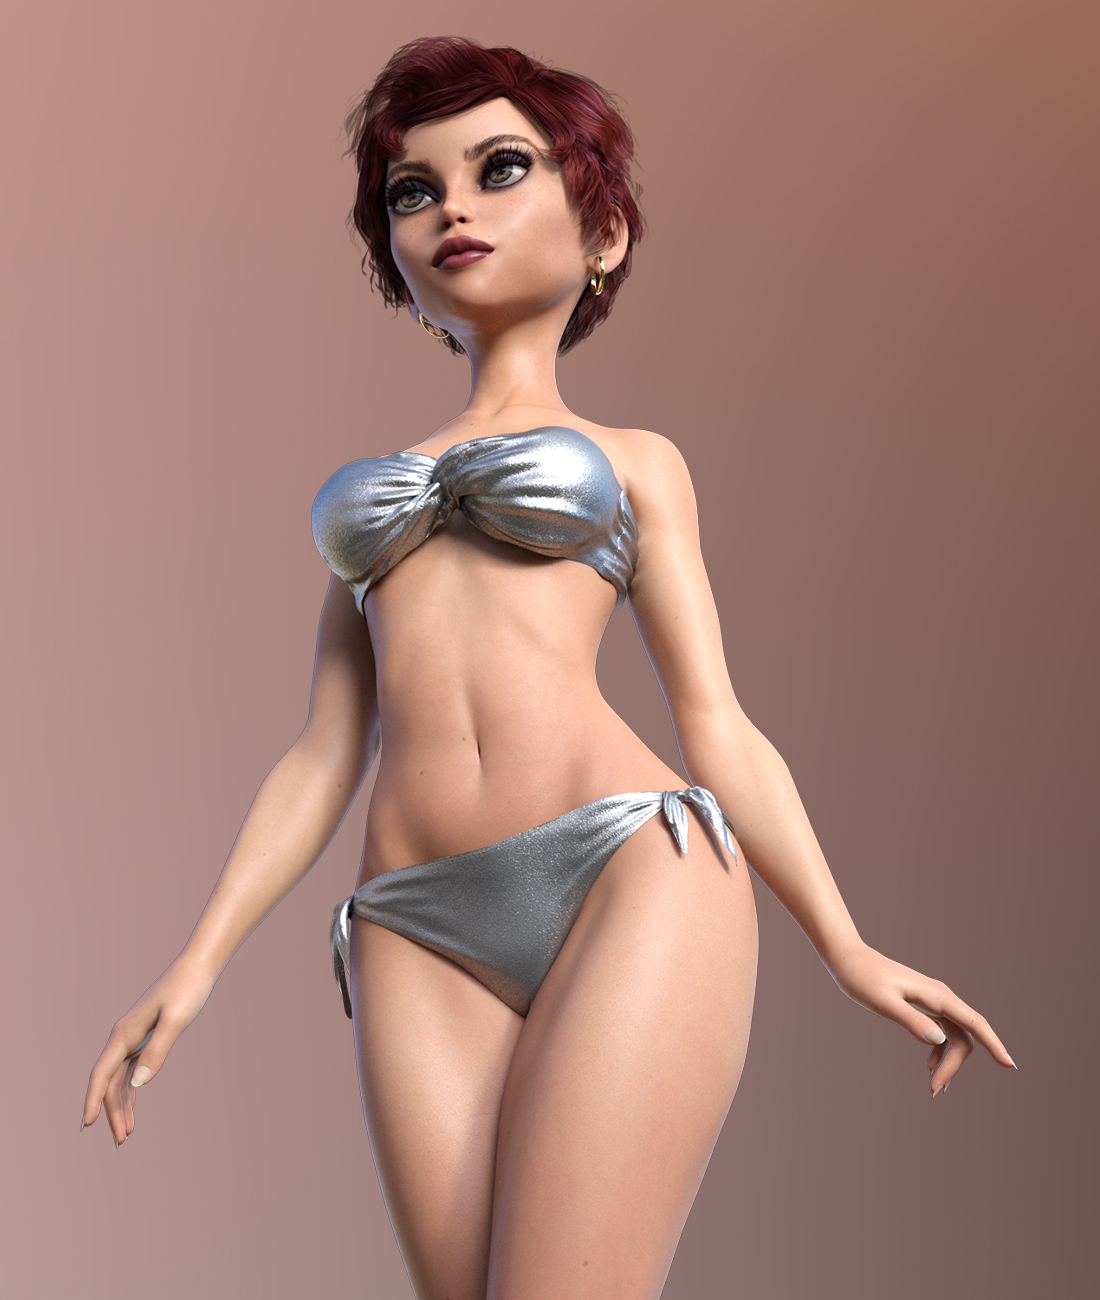 Vanessa for The Girl 8 by: 3DSublimeProductionsVex, 3D Models by Daz 3D